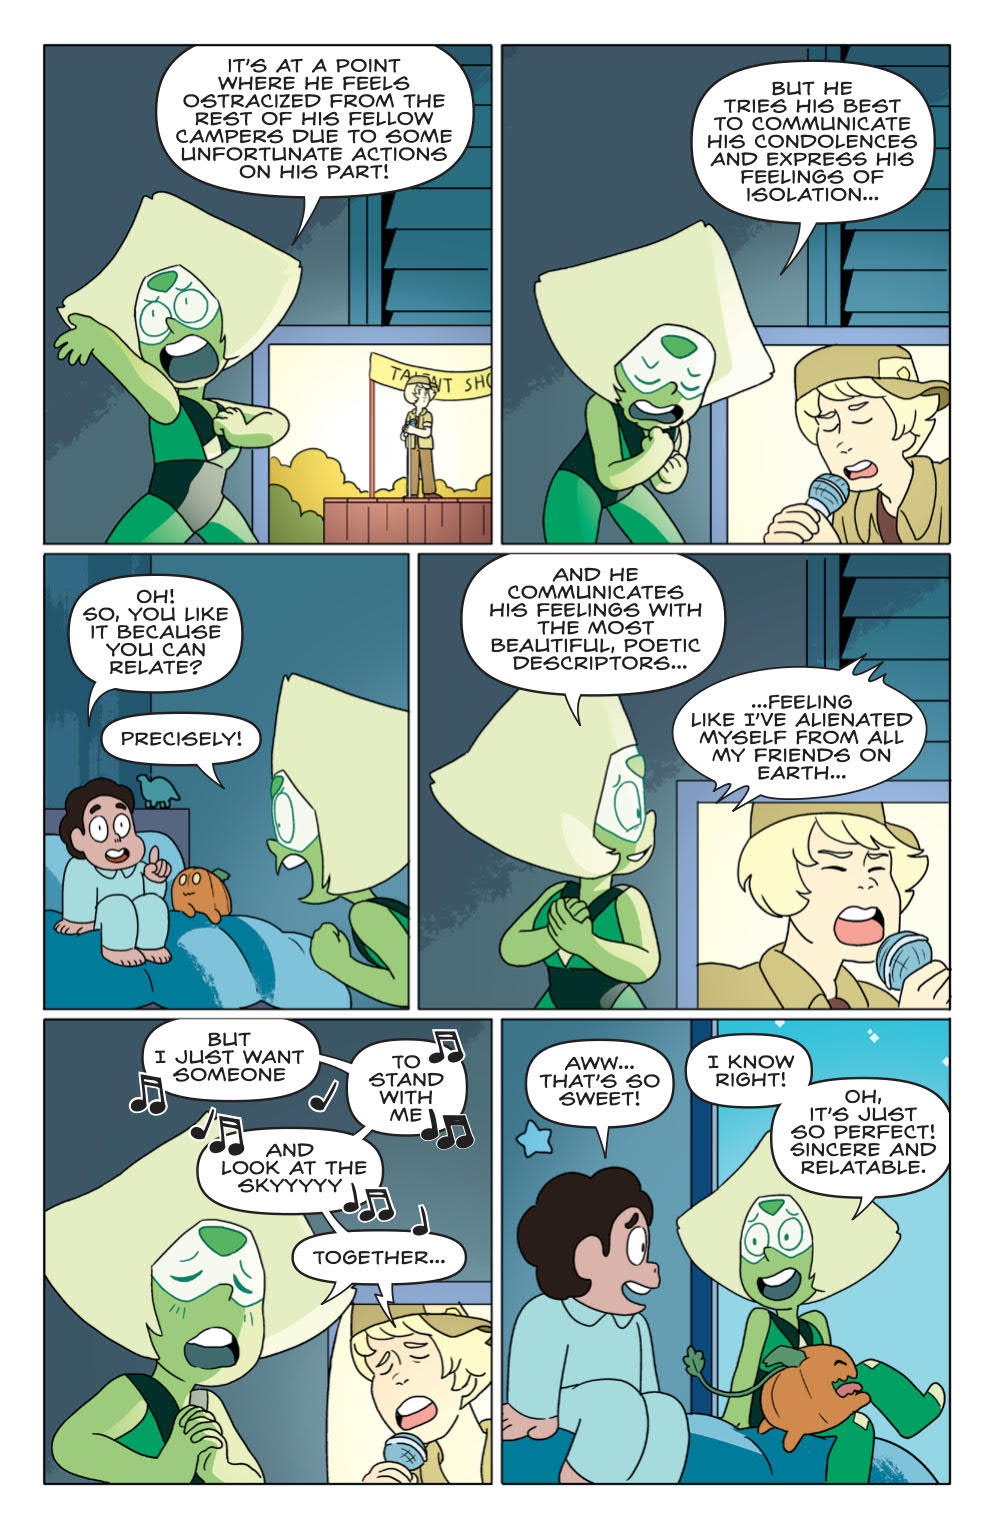 graphicpolicy: Steven Universe #21 Publisher: adult photos